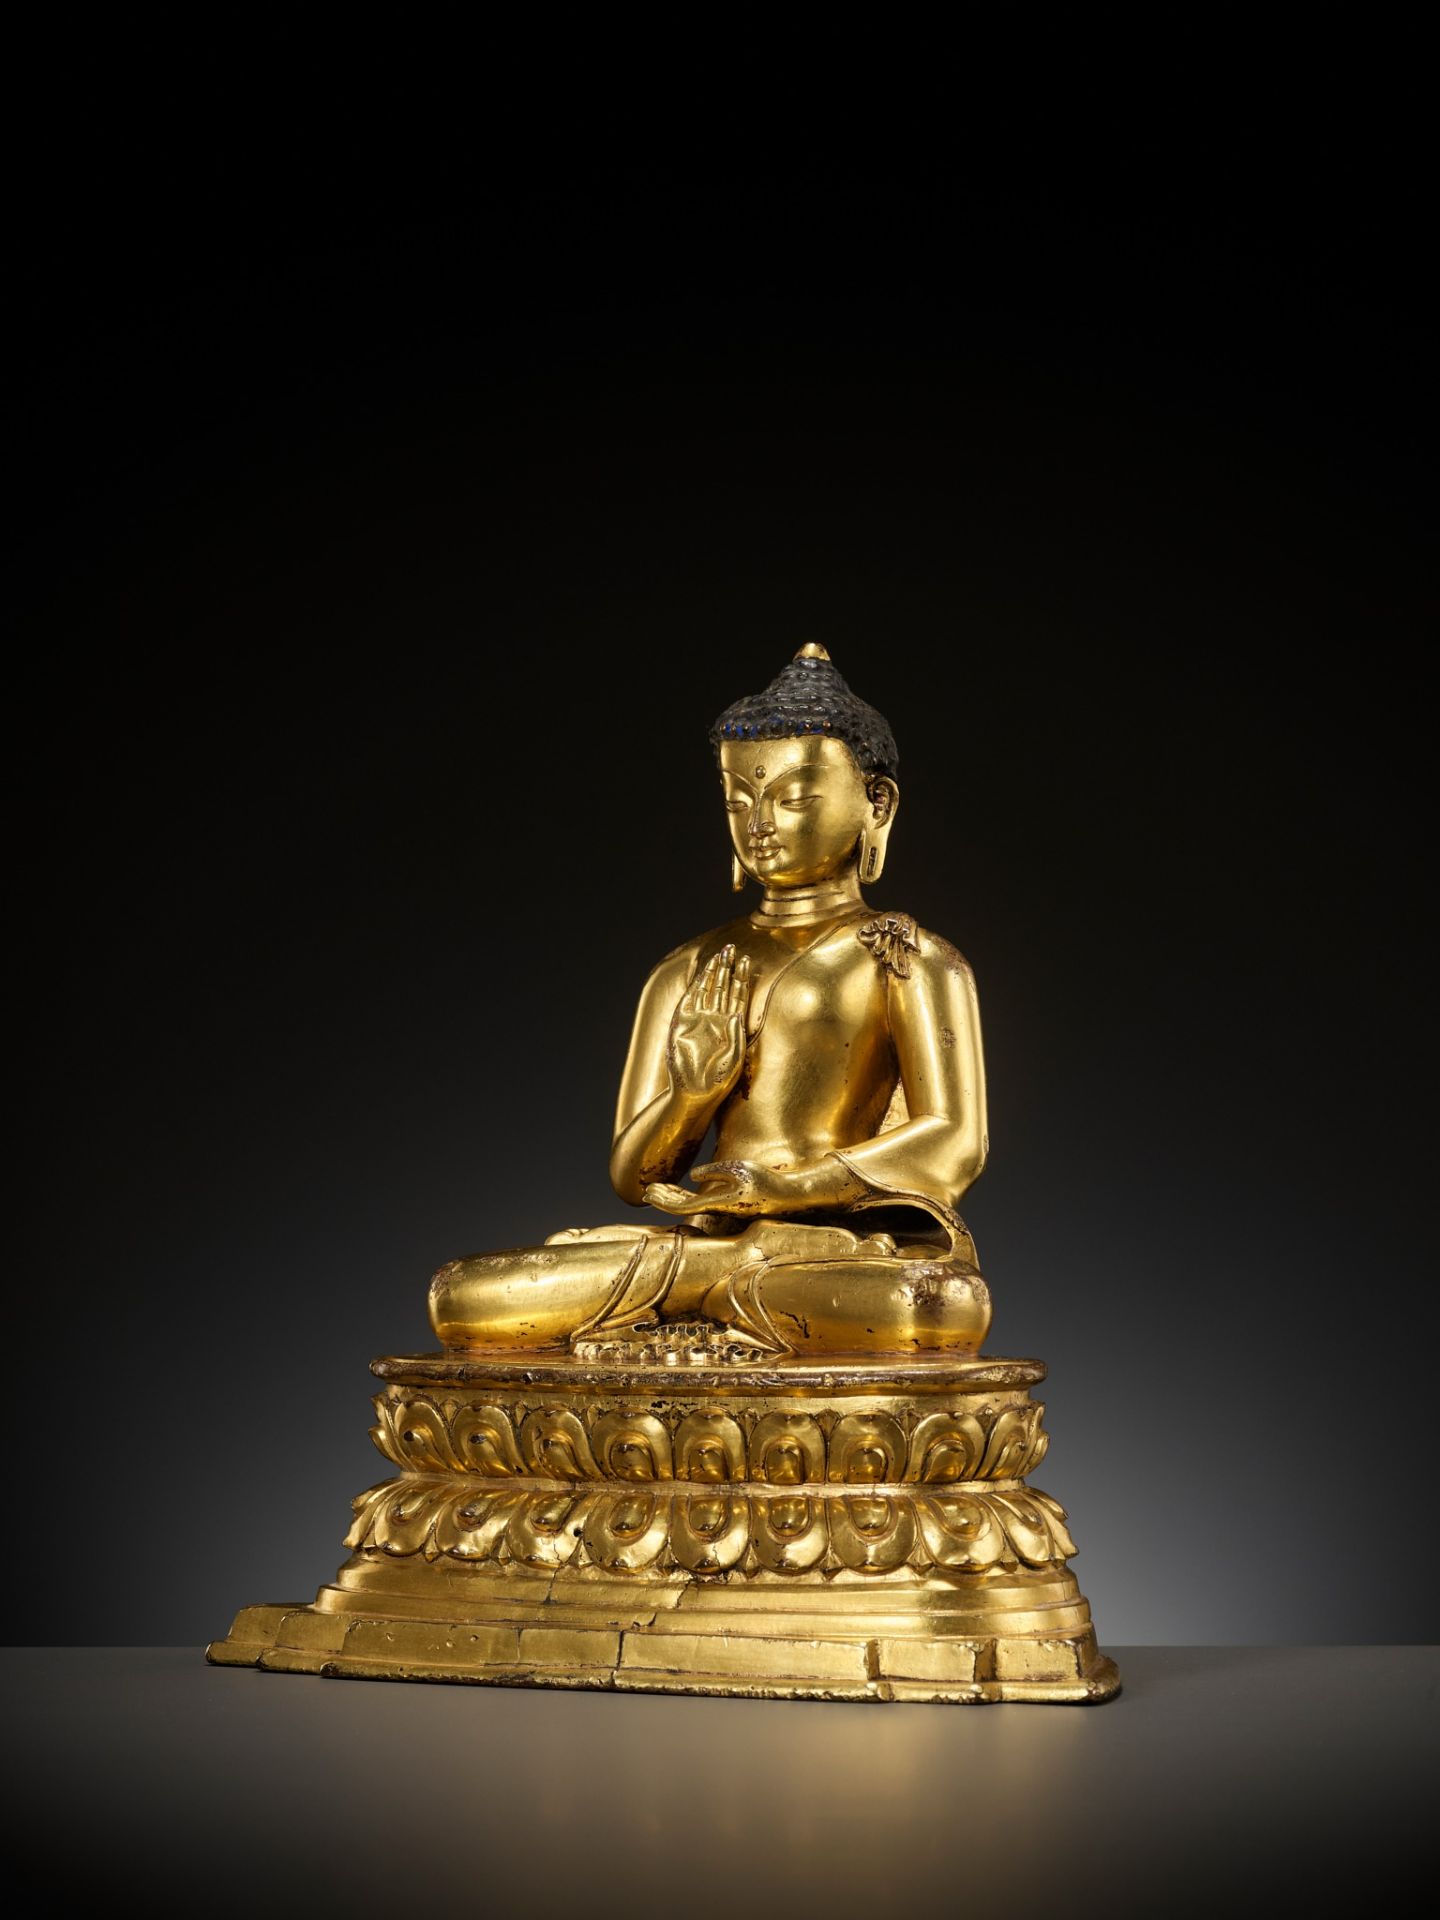 A GILT COPPER ALLOY FIGURE OF AMOGHASIDDHI, POSSIBLY DENSATIL, TIBET, 14TH-15TH CENTURY - Image 10 of 22